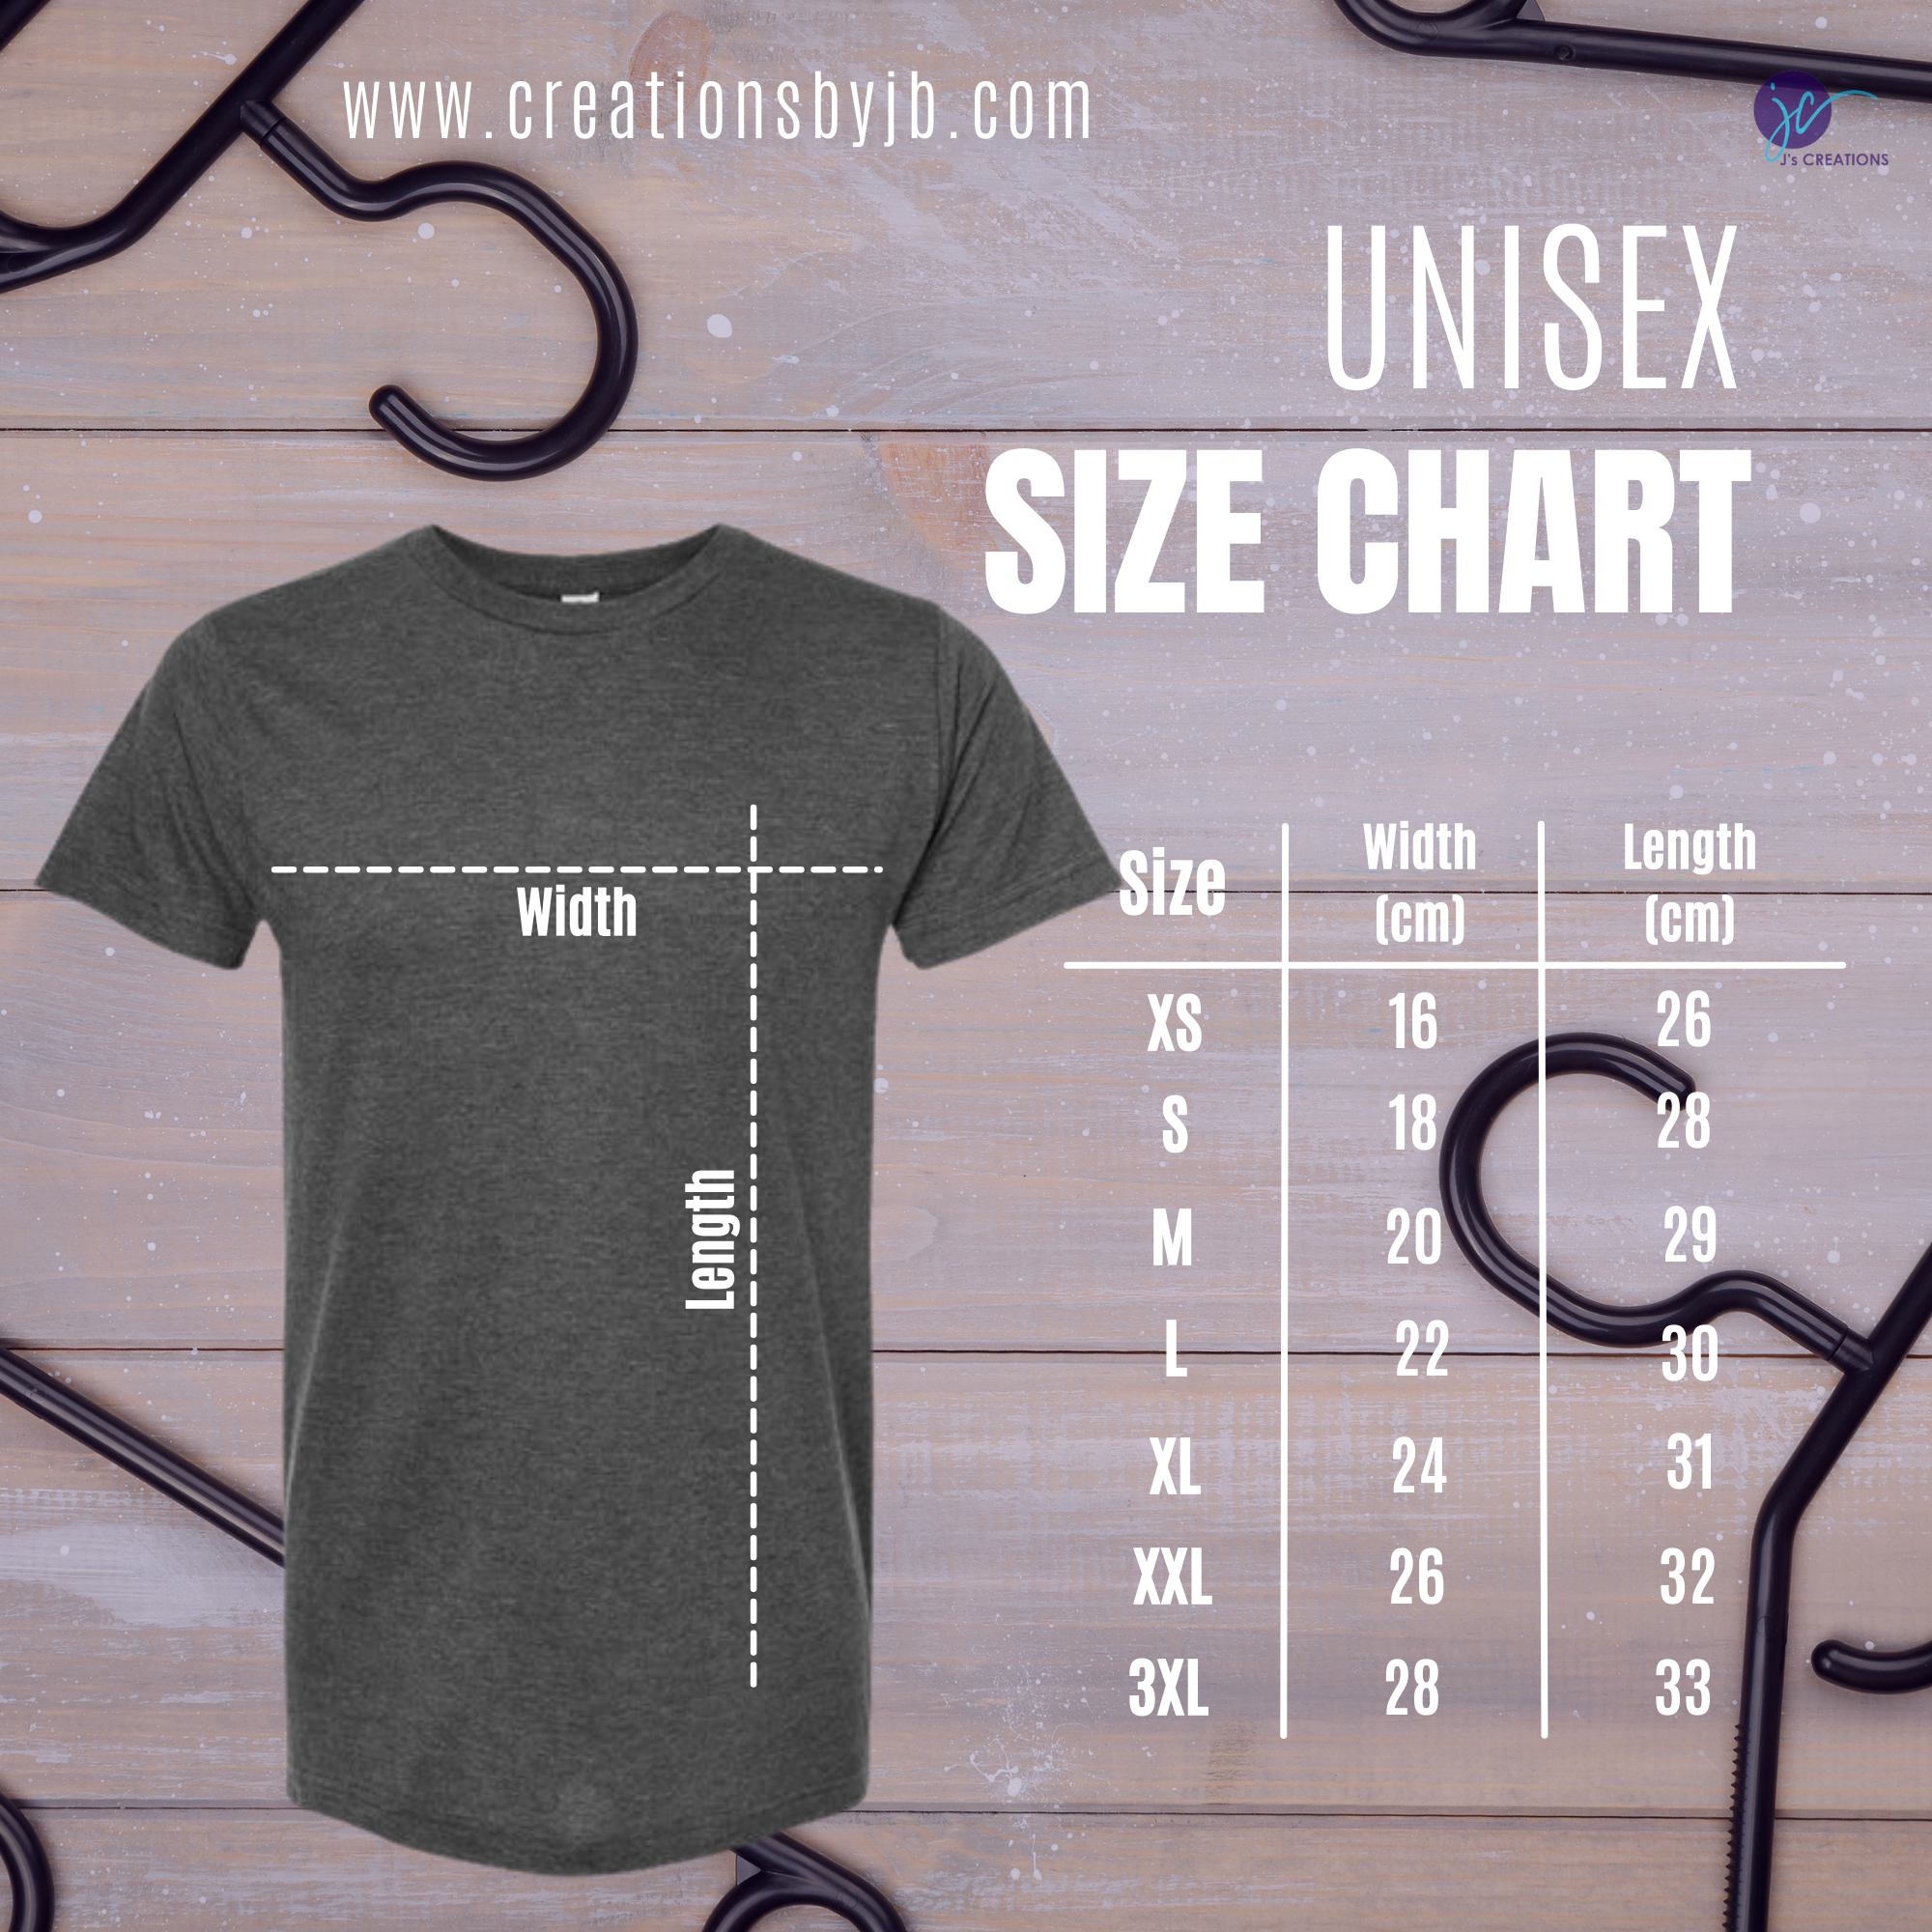 A t-shirt with the size of it and its measurements.